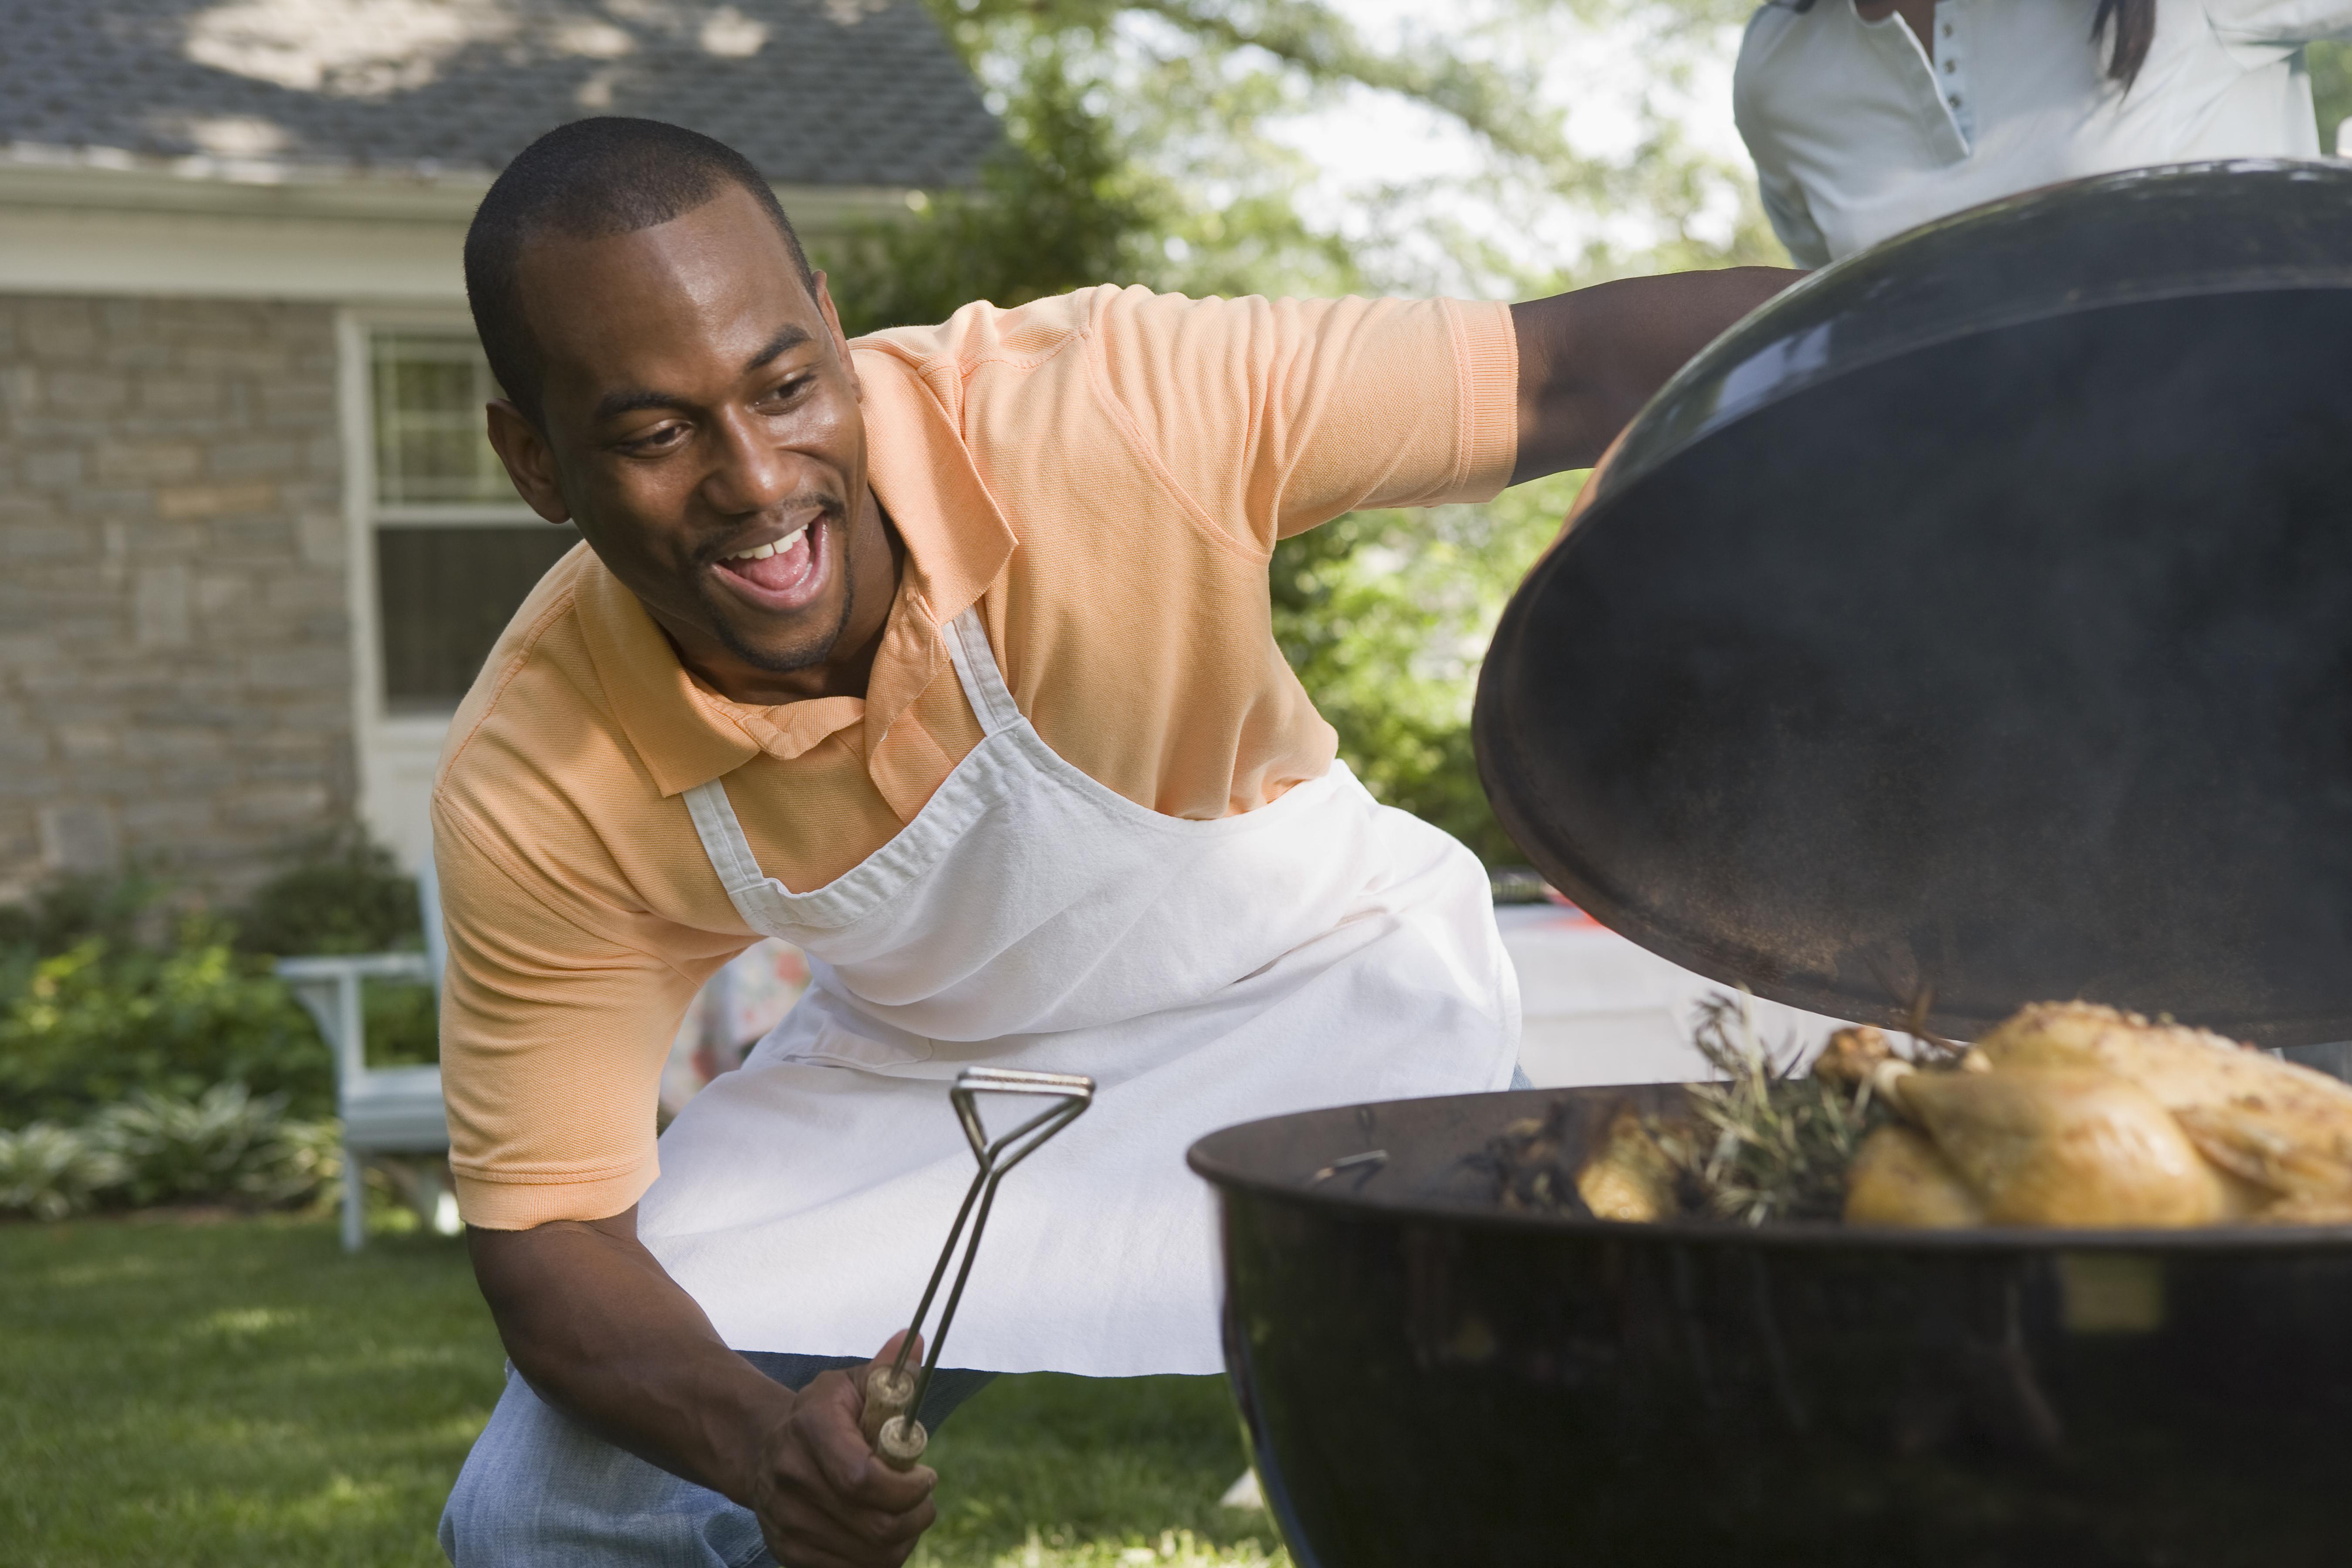 Smiling man cooking food on grill outdoors